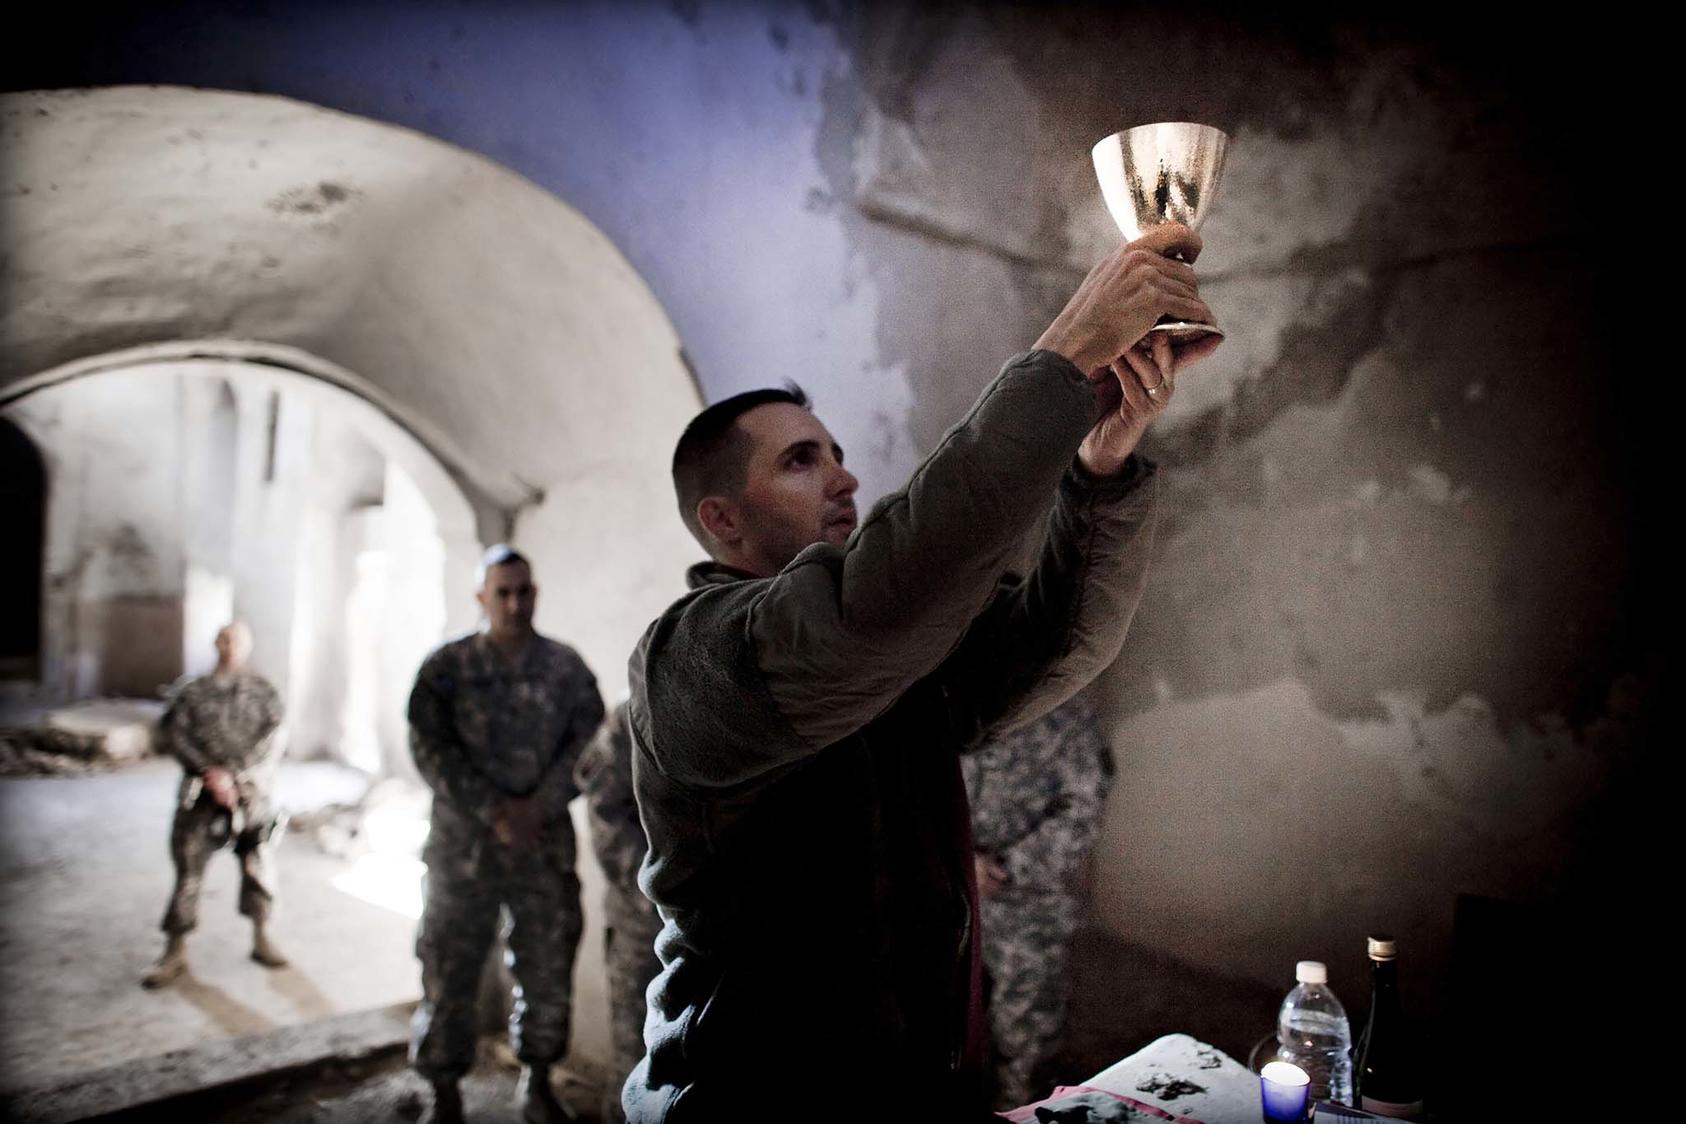 Major Jeffrey Whorton, an Army chaplain, gives mass to a small group of soldiers inside the ruins of the Saint Elijah Monastery near Mosul, Iraq. December 2009. (Eros Hoagland/The New York Times)